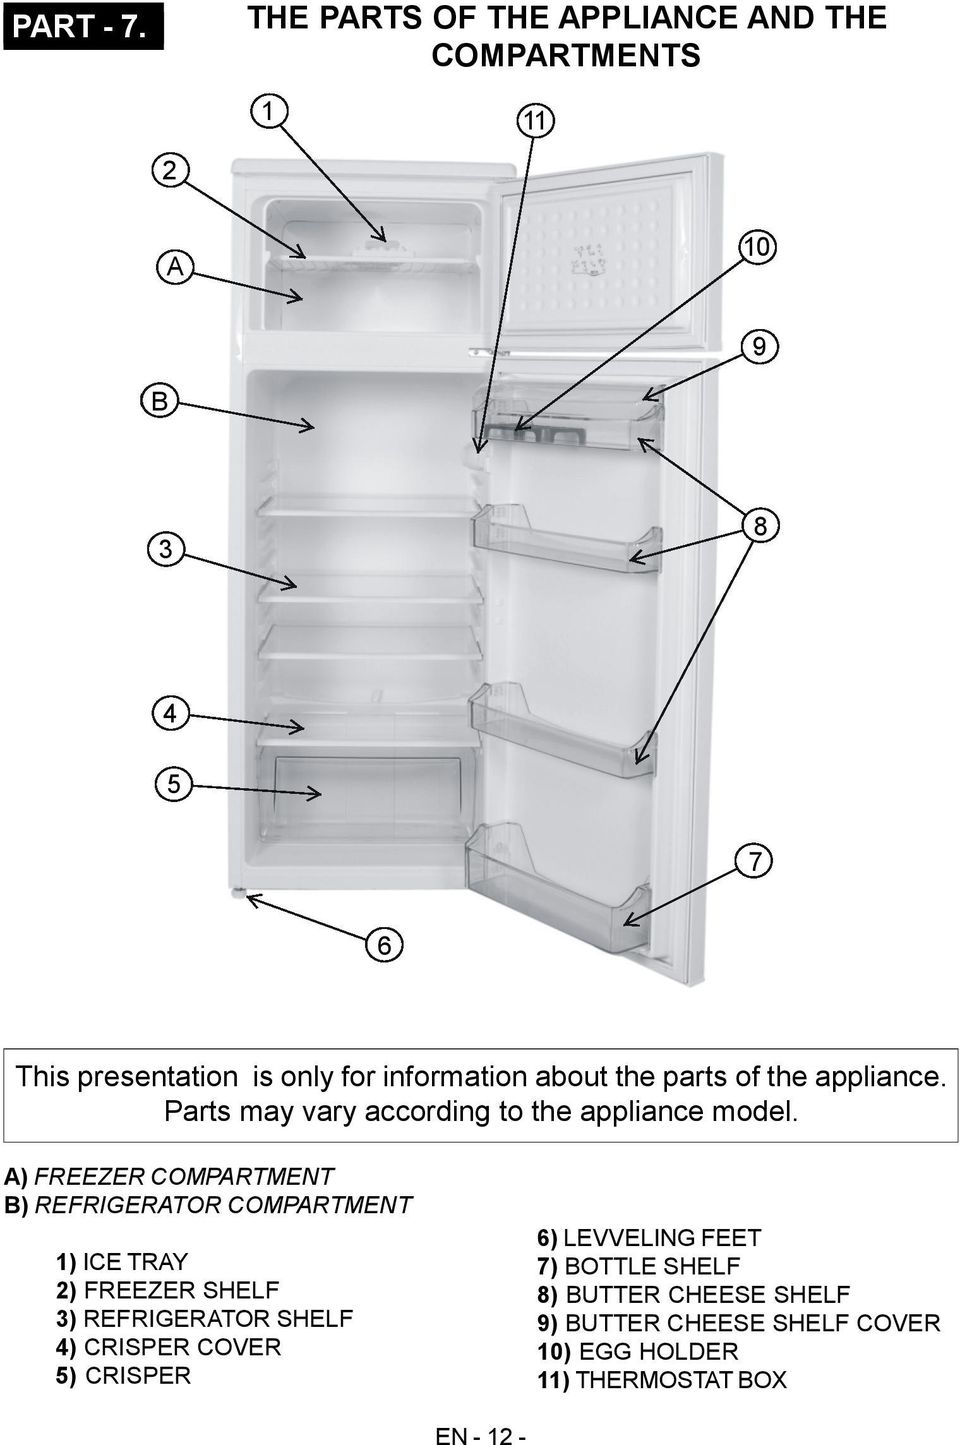 about the parts of the appliance. Parts may vary according to the appliance model.